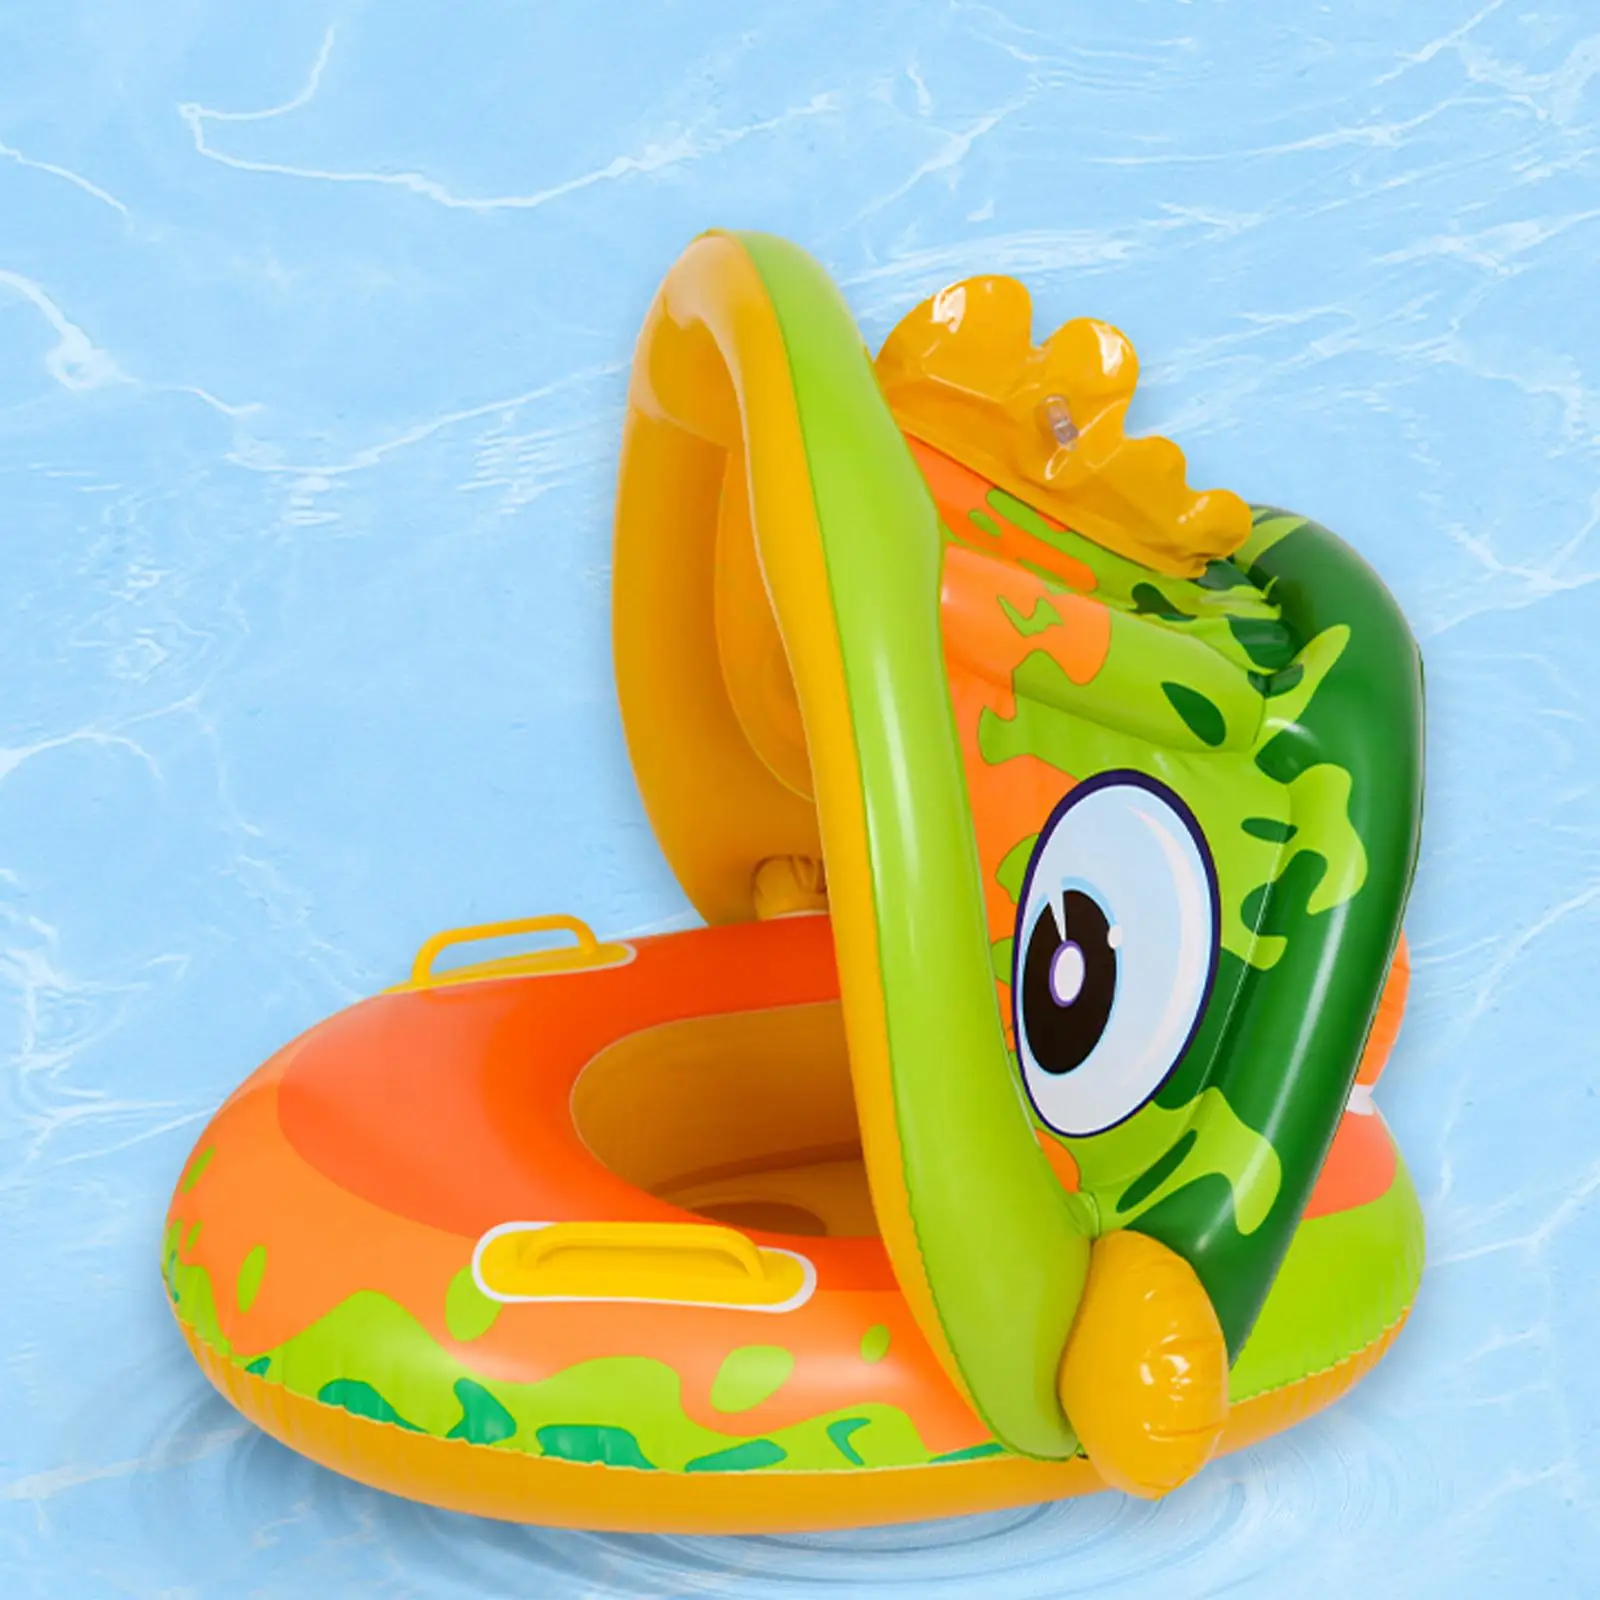 Dinosaur Float Seat Toy Baby Infant Pool with Canopy Aid Portable Children Toddlers